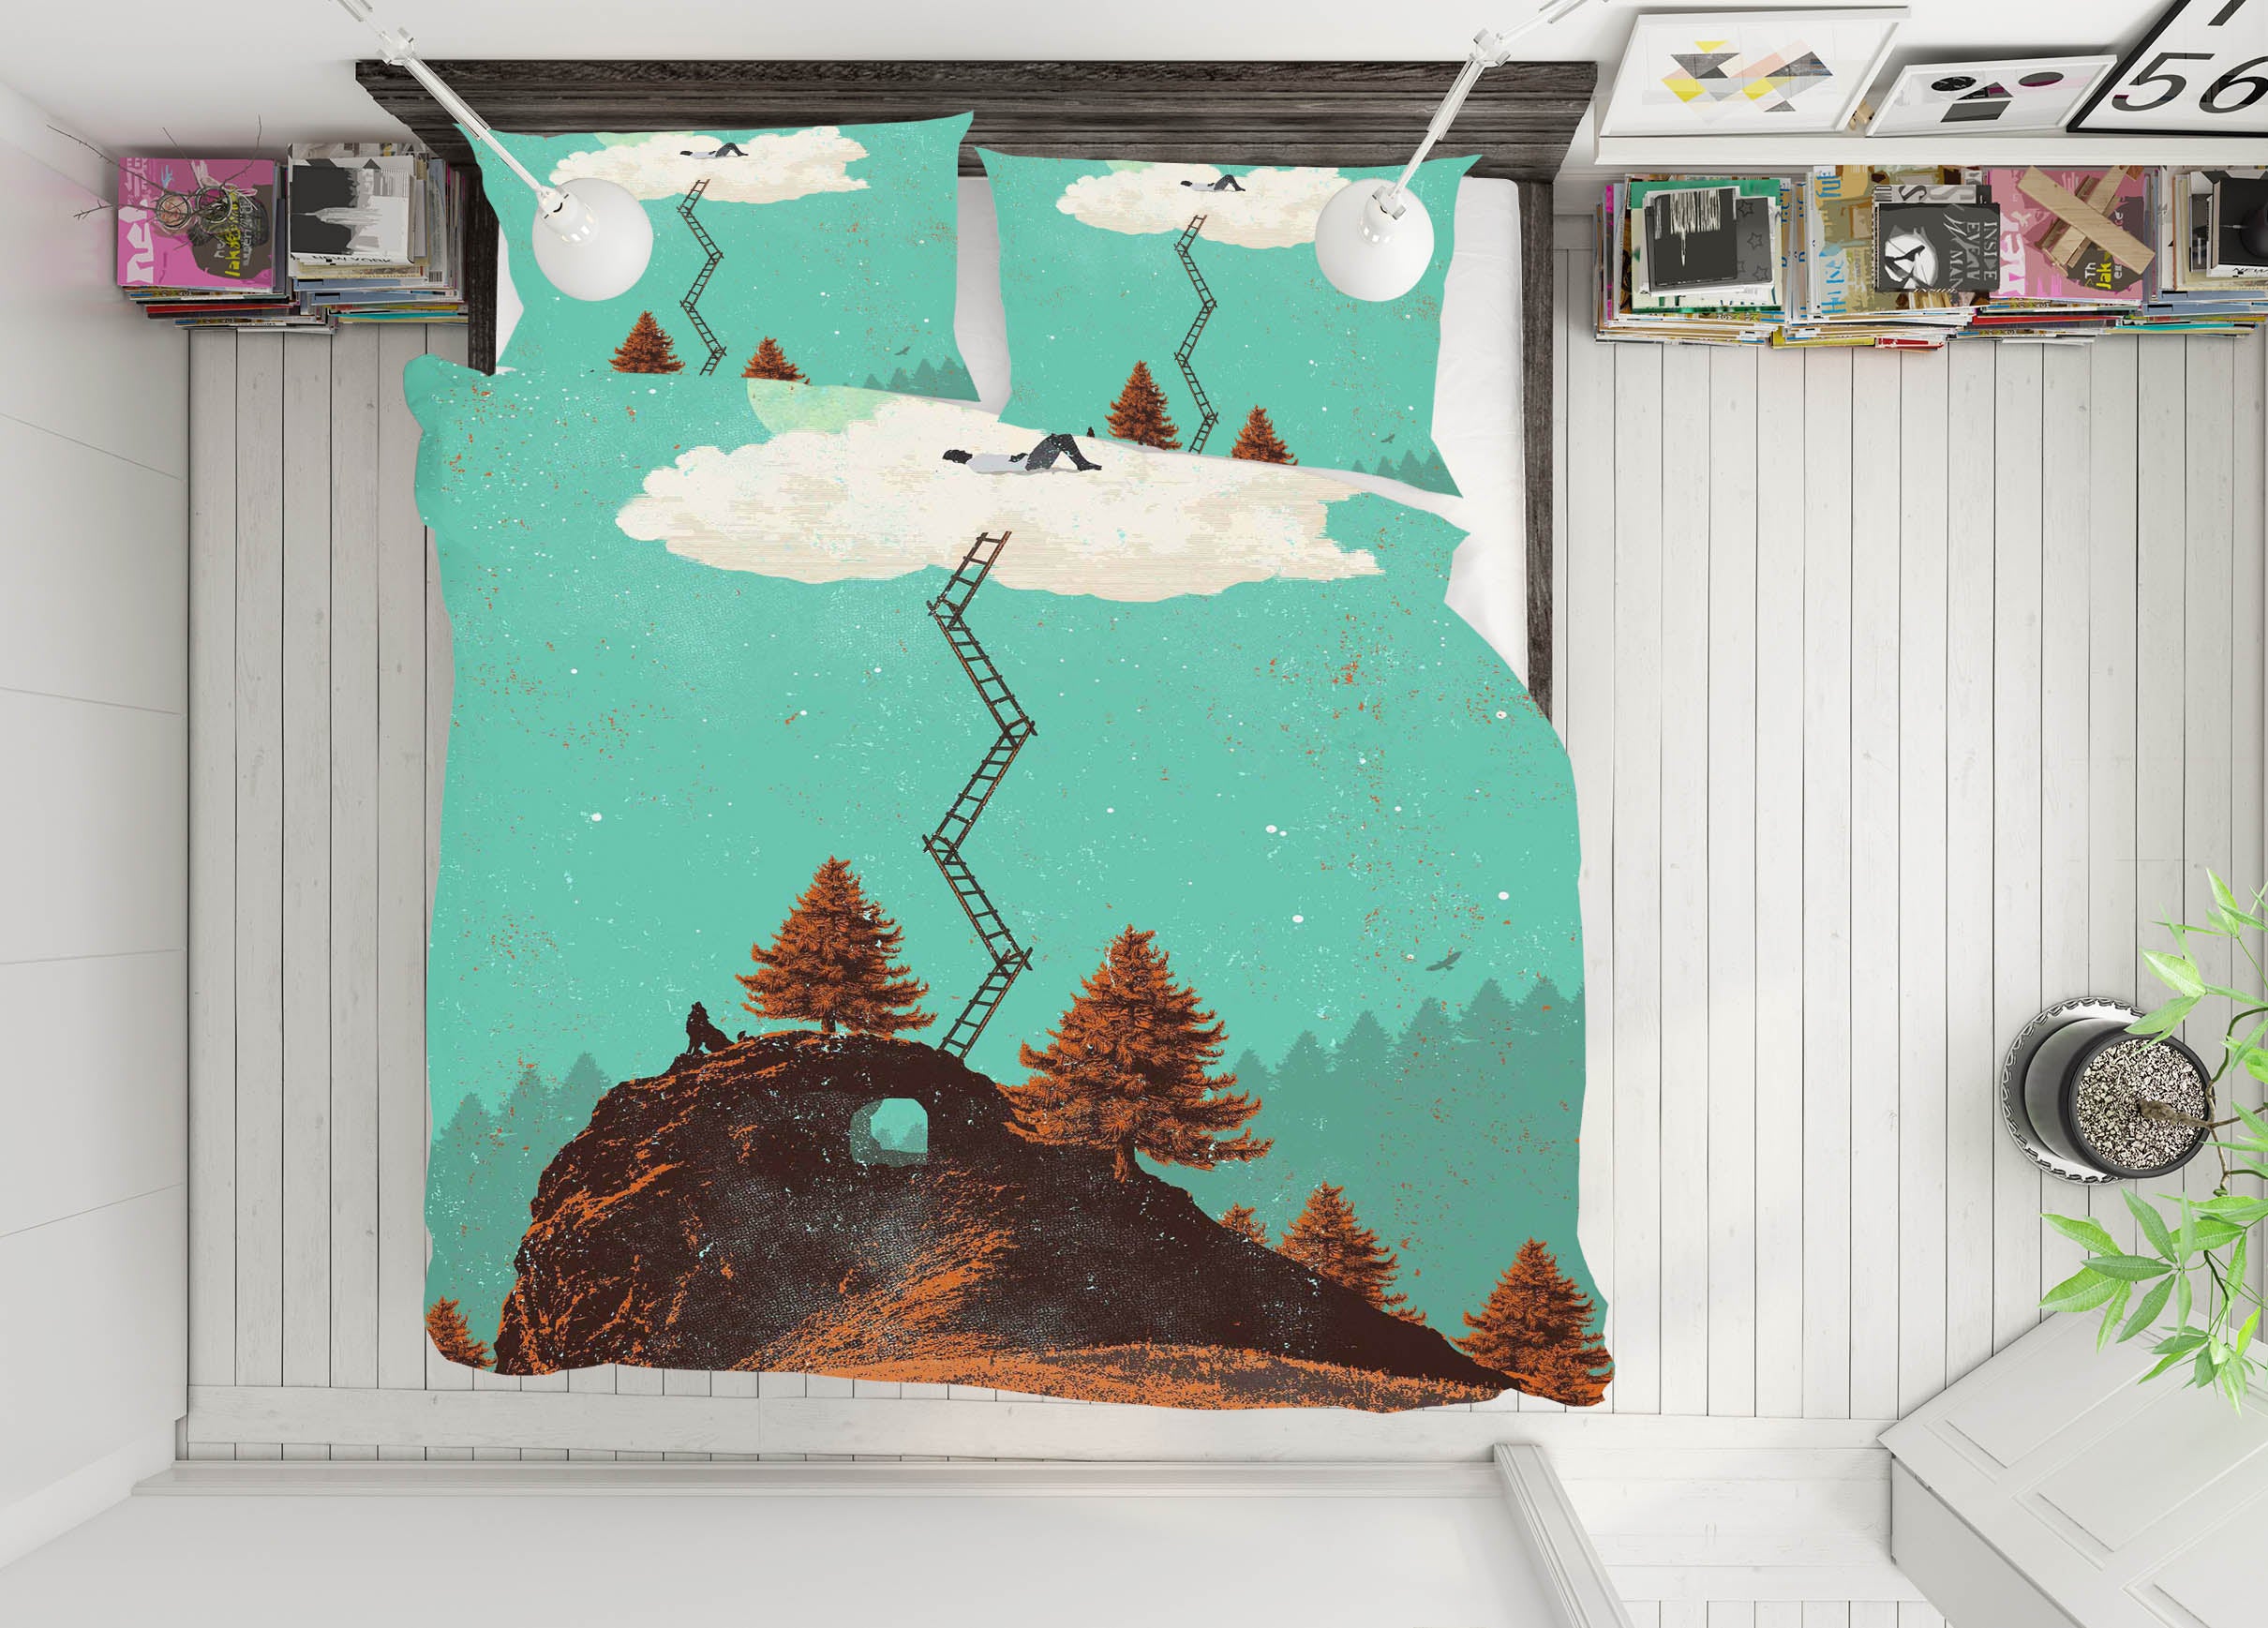 3D Cloud Dreaming 2101 Showdeer Bedding Bed Pillowcases Quilt